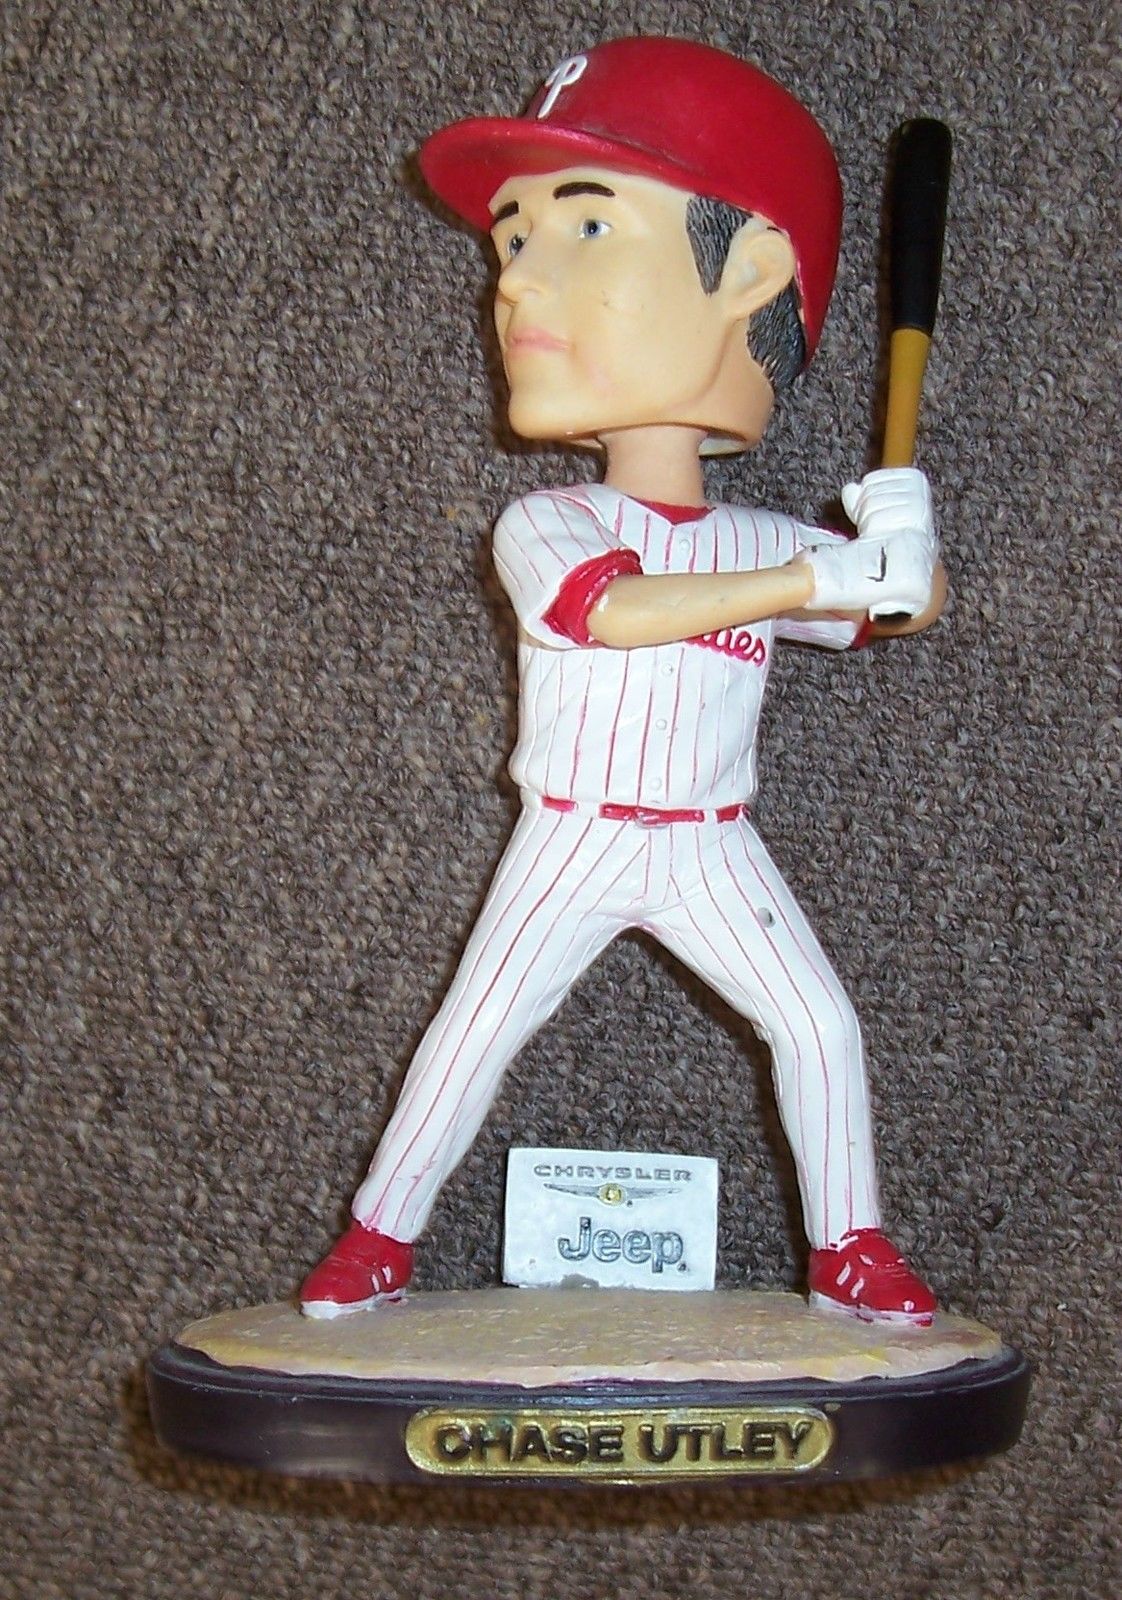 Collectible of the Week: Chase Utley, 2006 SGA Bobble Head — The